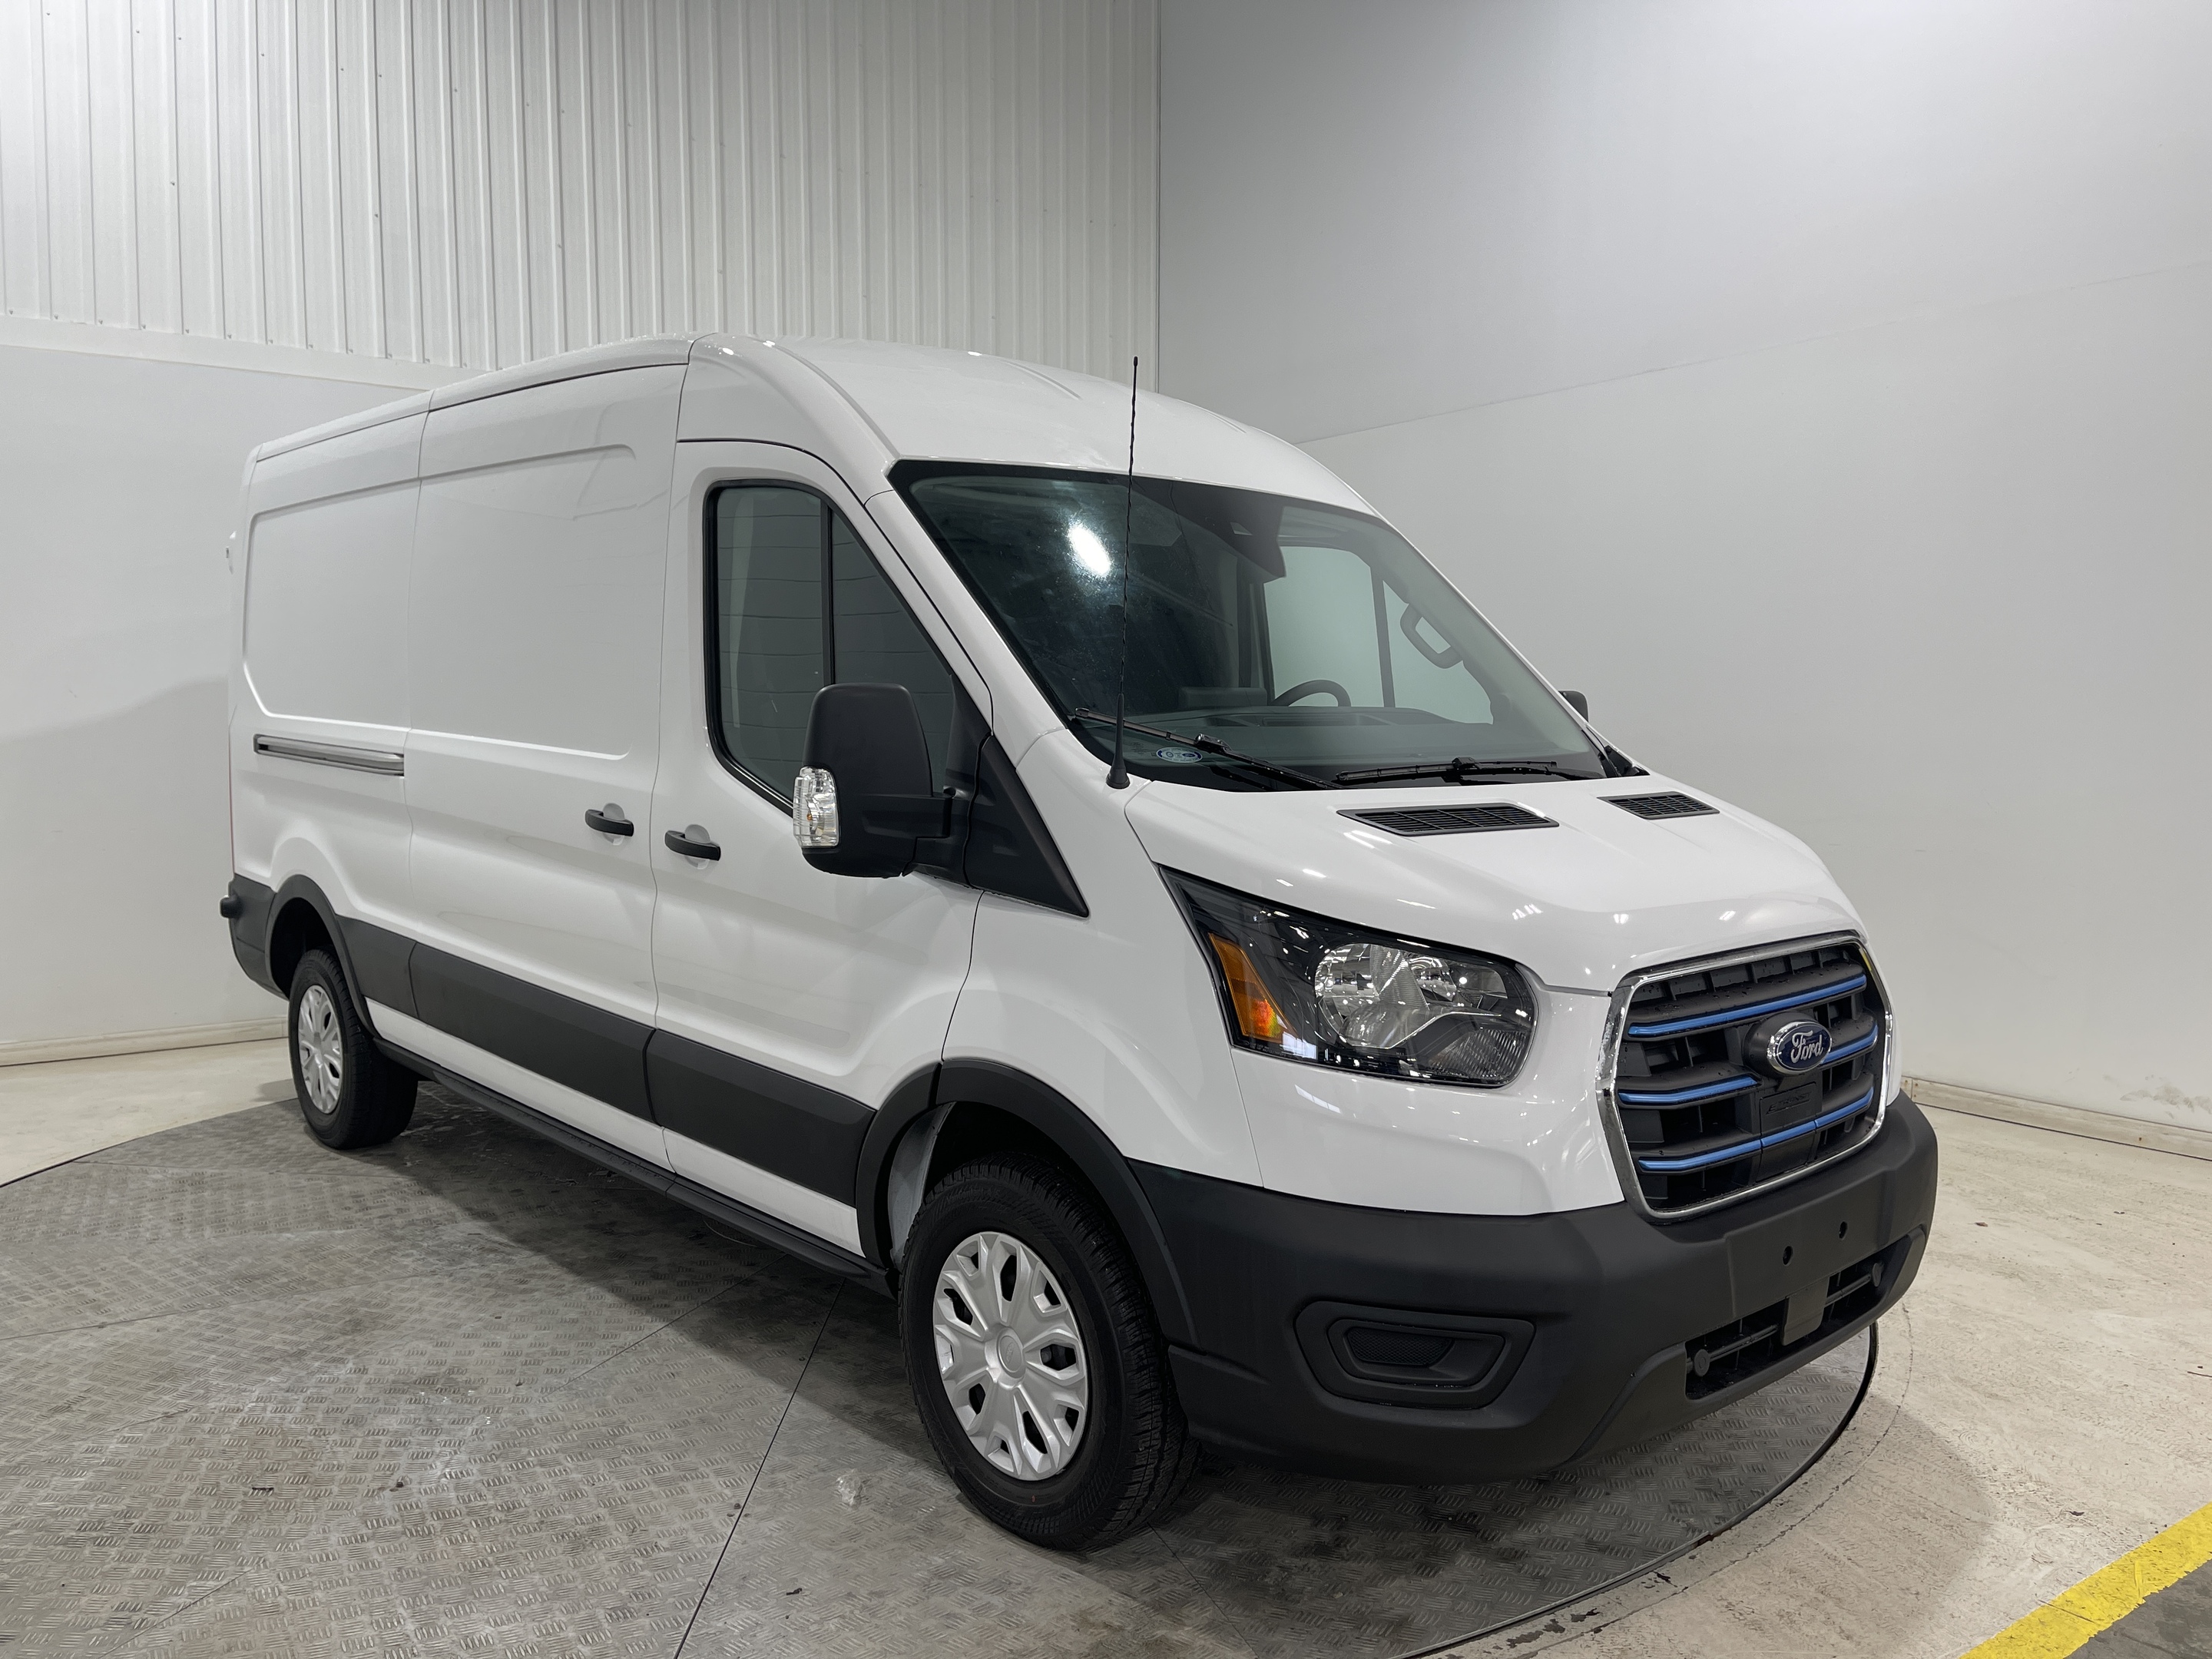 2022 Ford E-Transit-350 Electric Double Roof Ladder Rack Rear Camera 